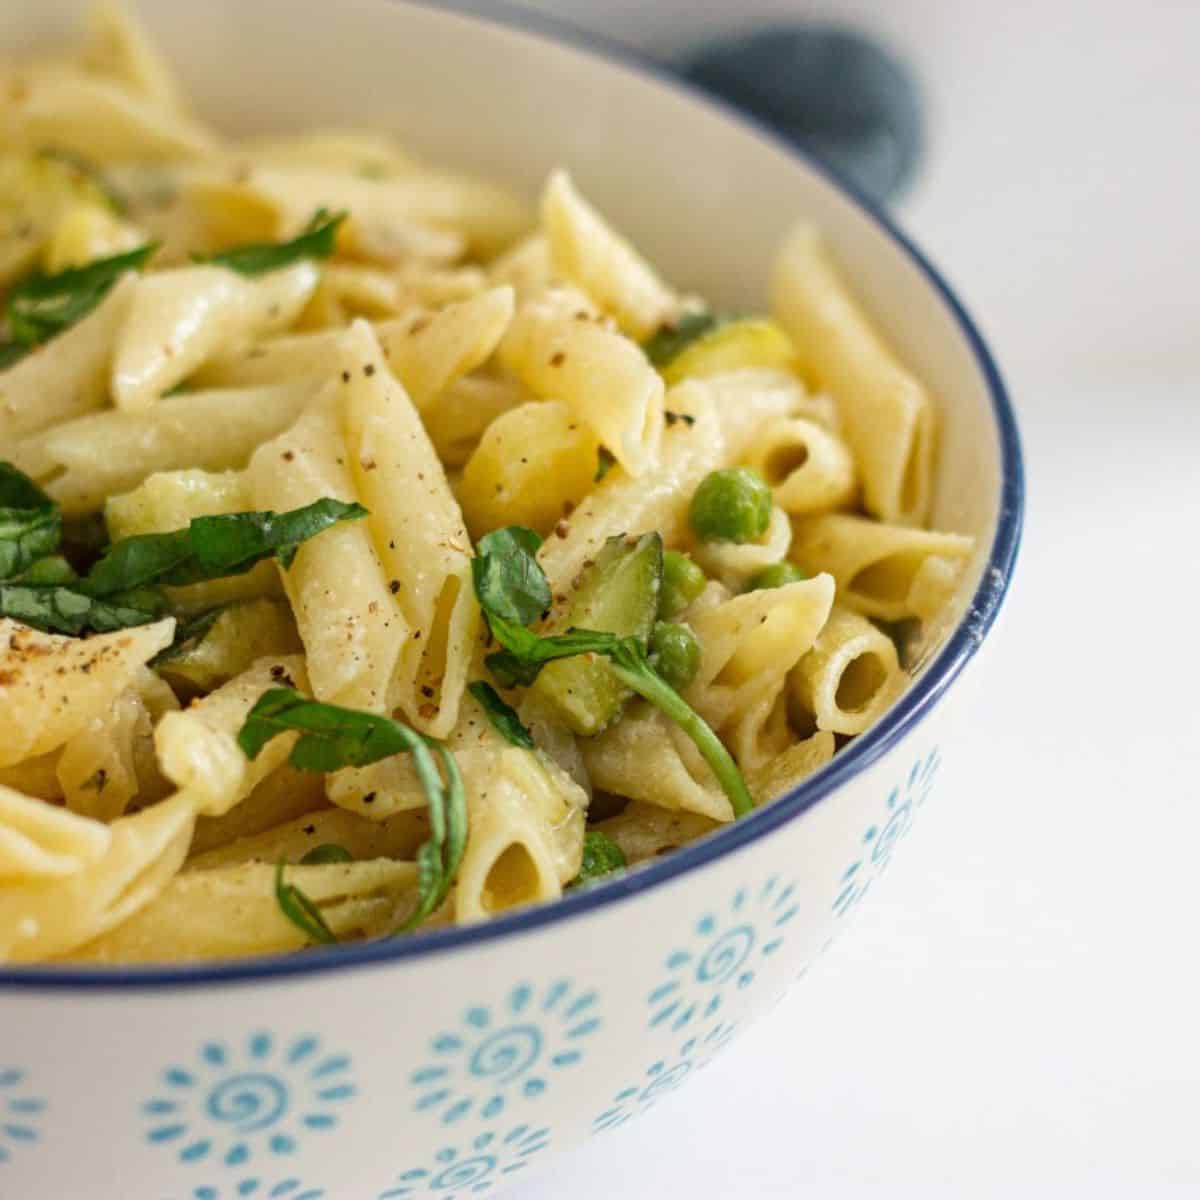 Penne with Zucchini, Peas and Vegan Cheese Recipe